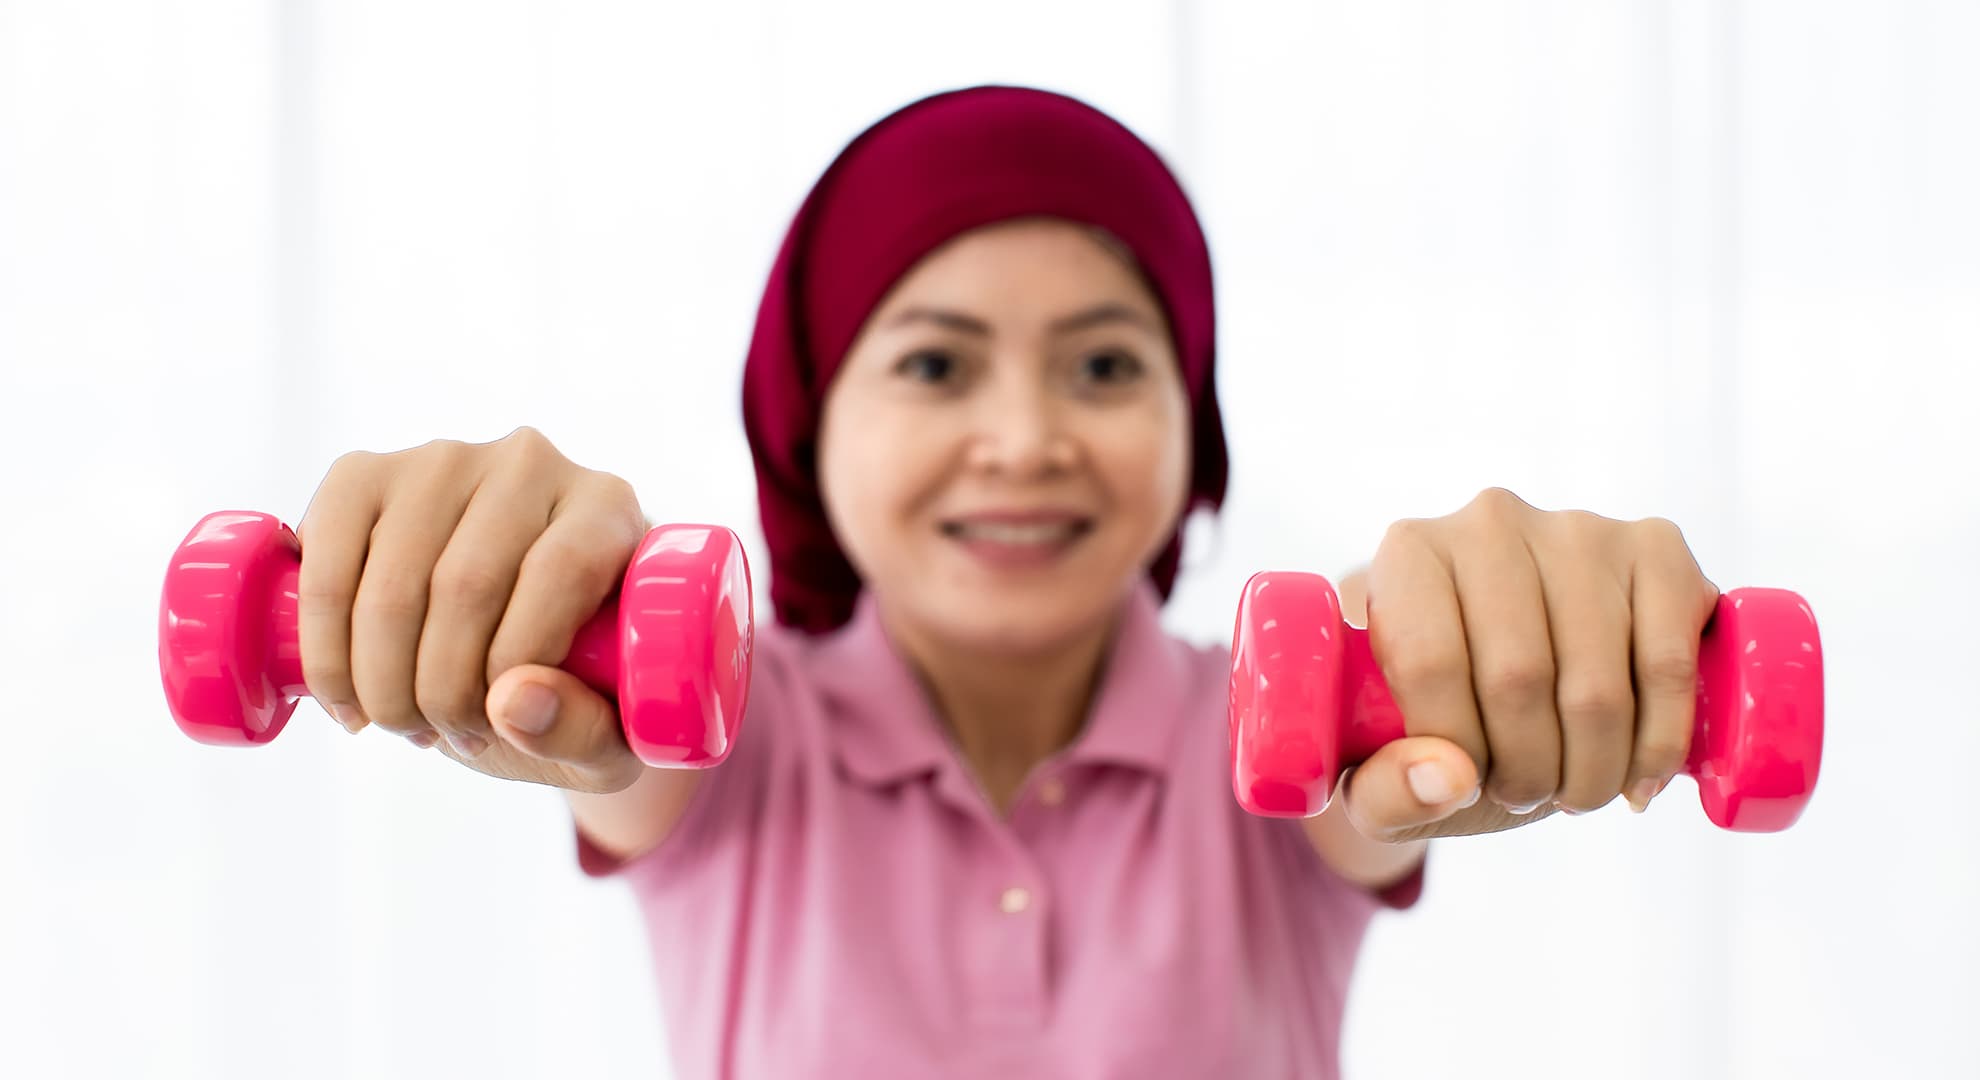 Female cancer patient holding up weights.